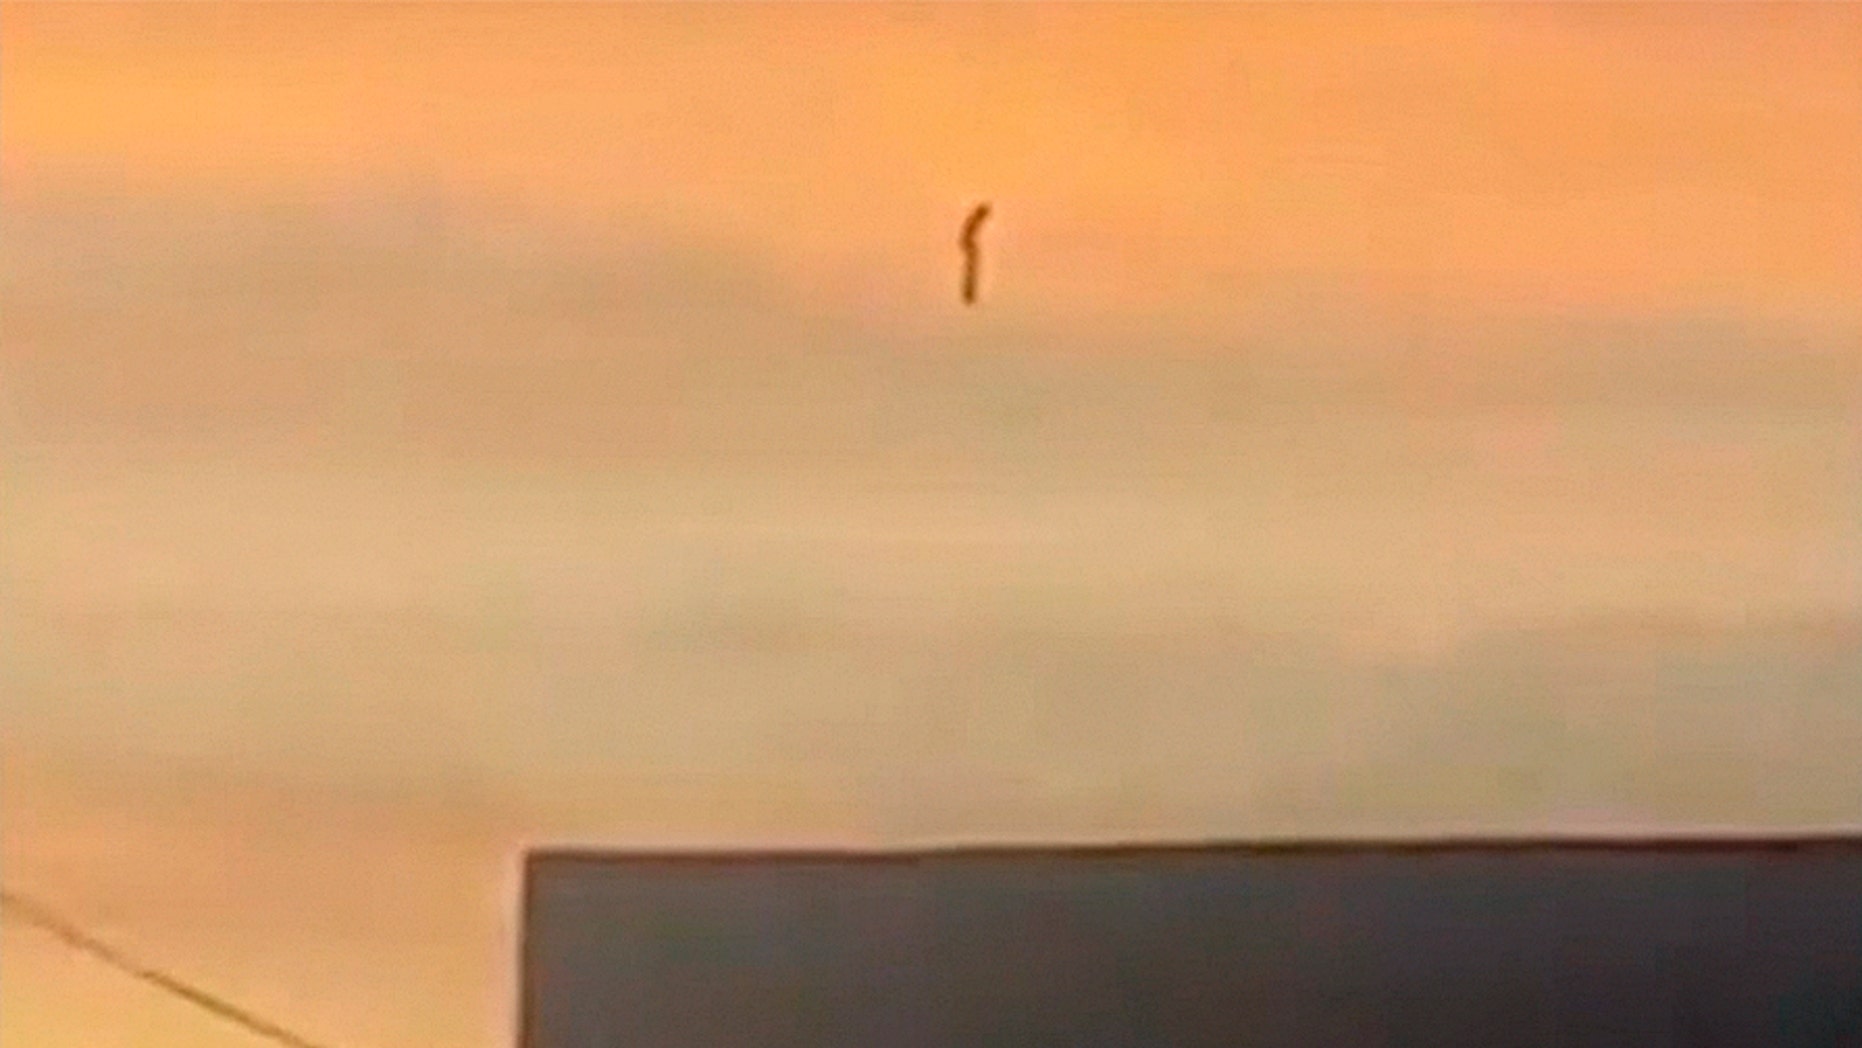 Weird footage of 'humanoid UFO' over Mexico goes viral, sparks skepticism |  Fox News